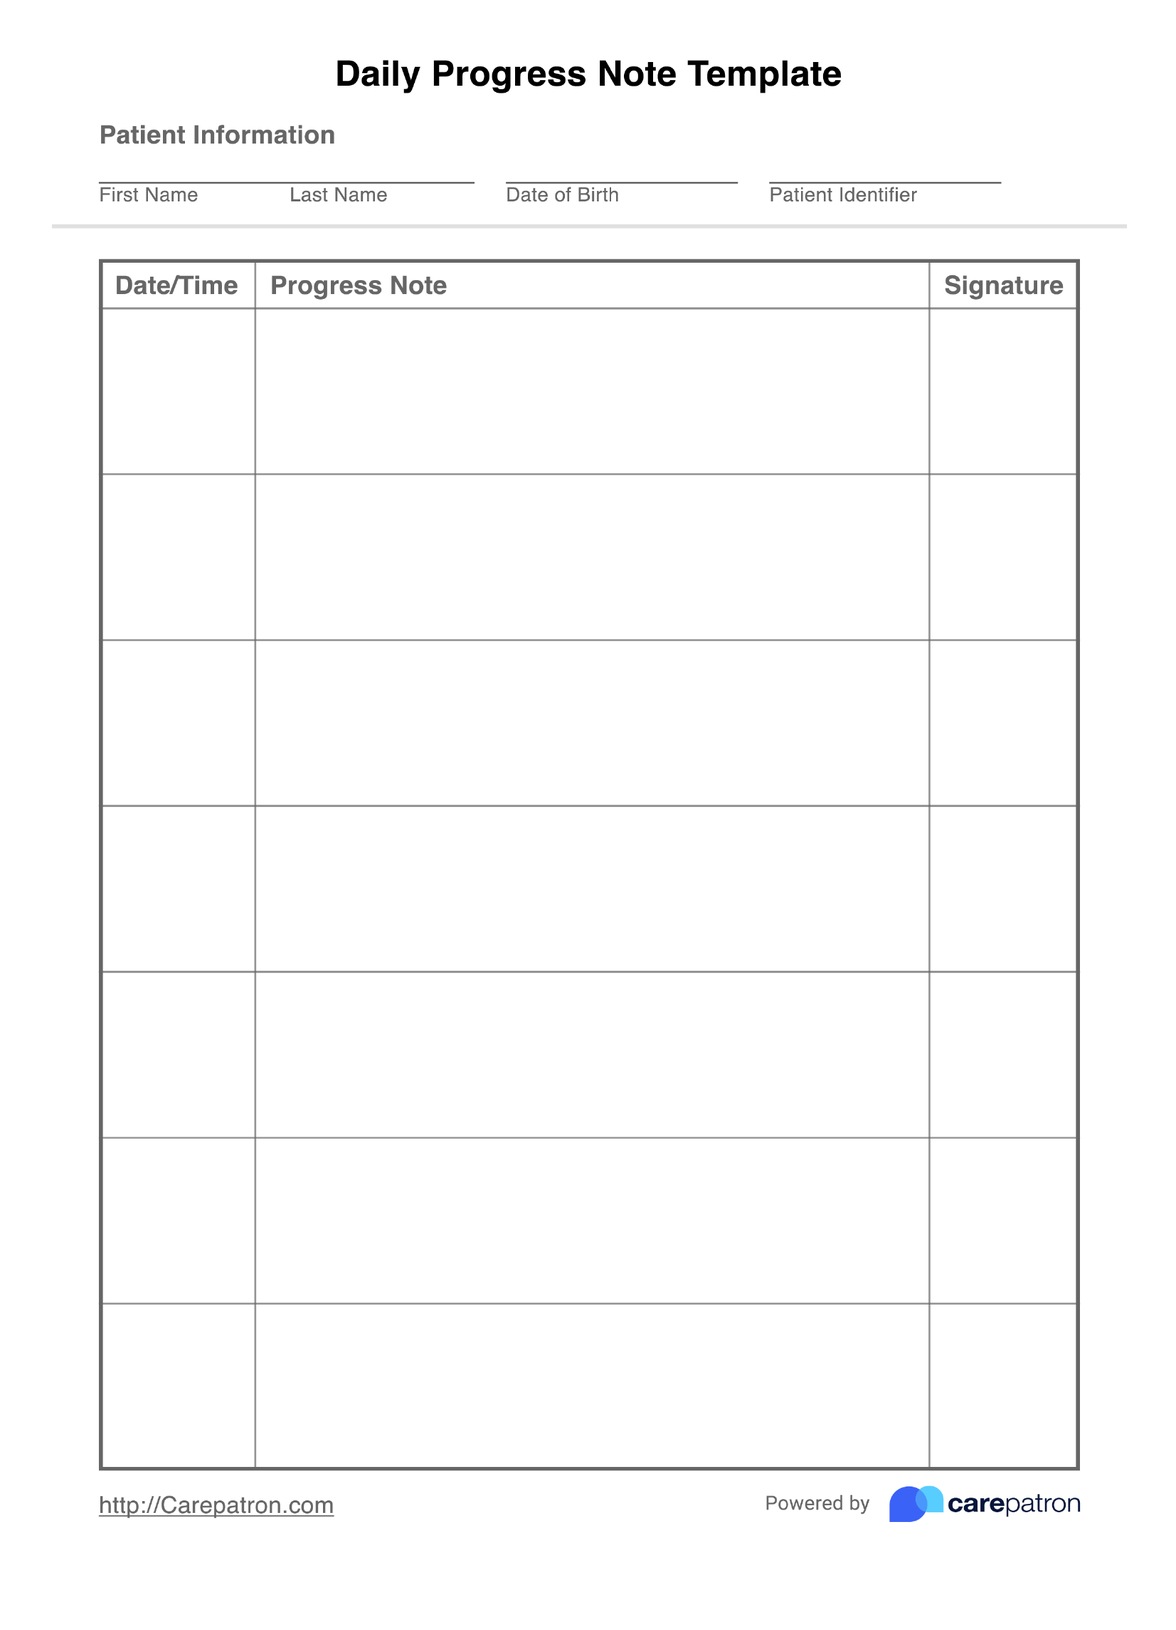 Daily Progress Note Template PDF Example